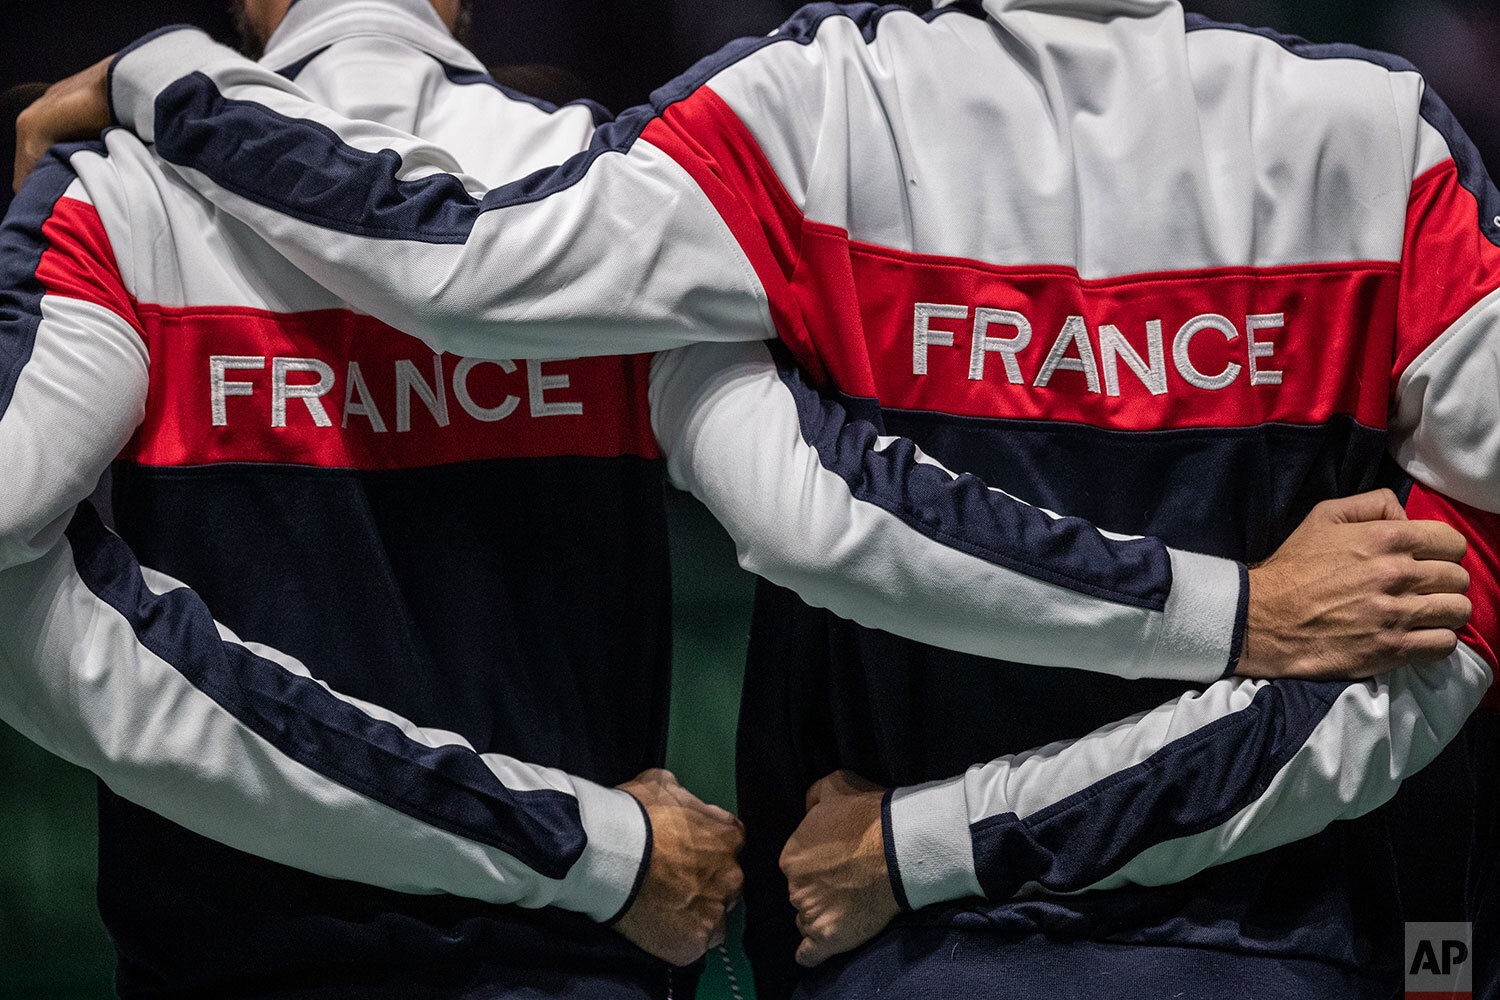  France players stand during the national anthem before the Davis Cup tennis match between Jo-Wilfried Tsonga and Serbia's Filip Krajinovic in Madrid, Spain, Thursday, Nov. 21, 2019. (AP Photo/Bernat Armangue) 